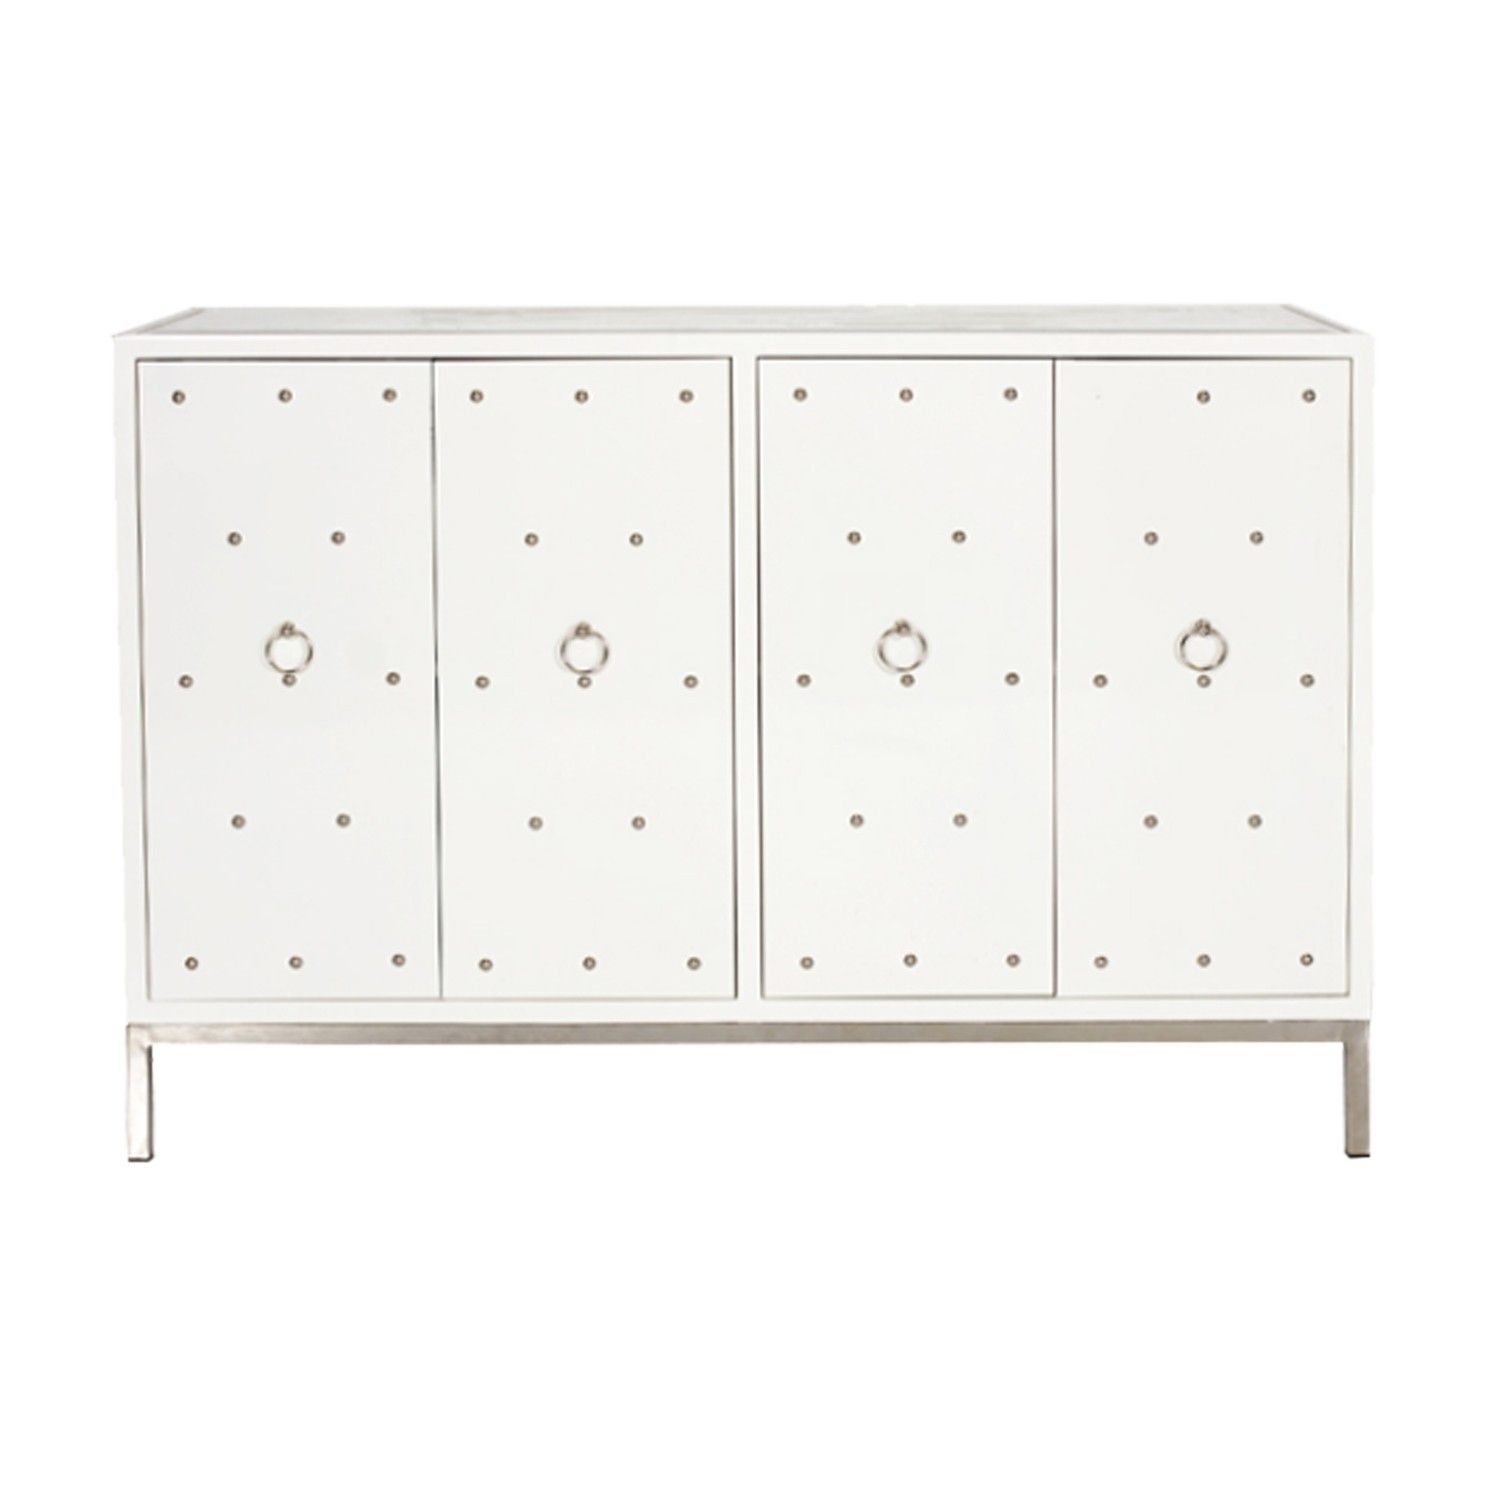 Studly – White Lacquer Nickel Studded Buffet With Inset Throughout Longley Sideboards (View 29 of 30)